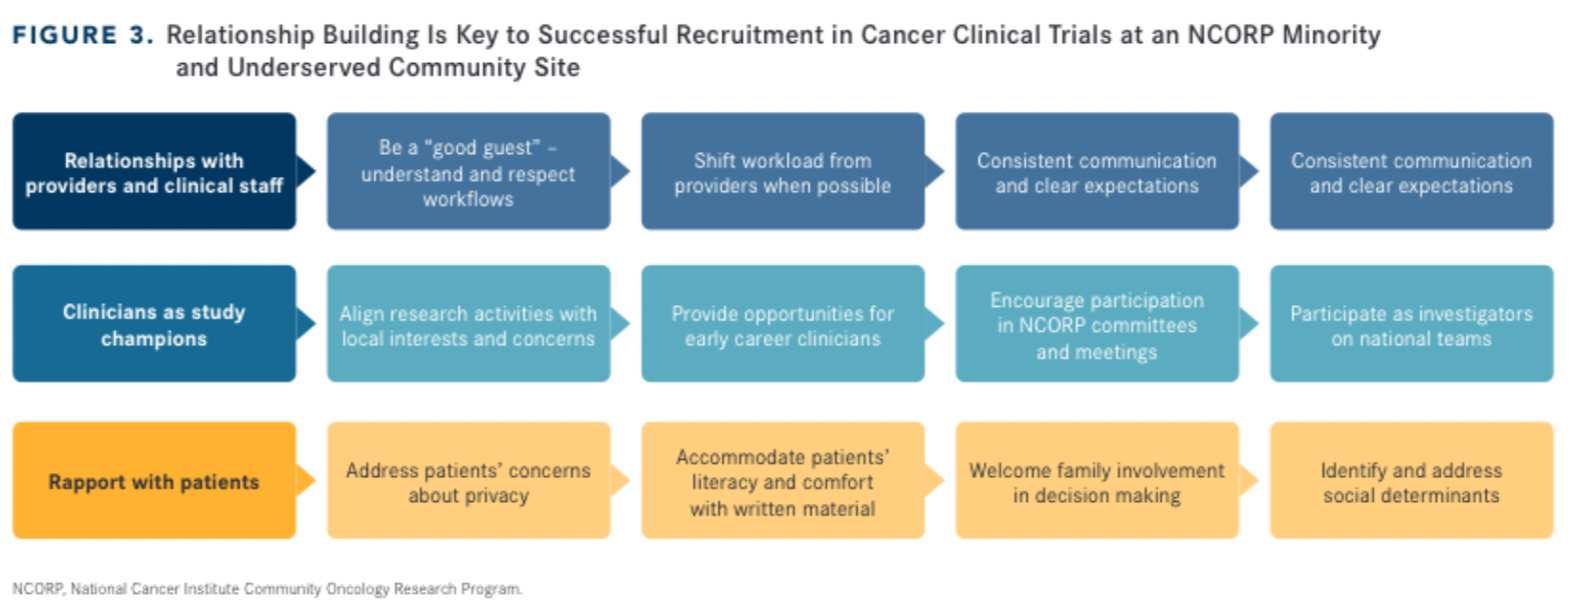 Relationship Building Is Key to Successful Recruitment in Cancer Clinical Trials at an NCORP Minority and Underserved Community Site